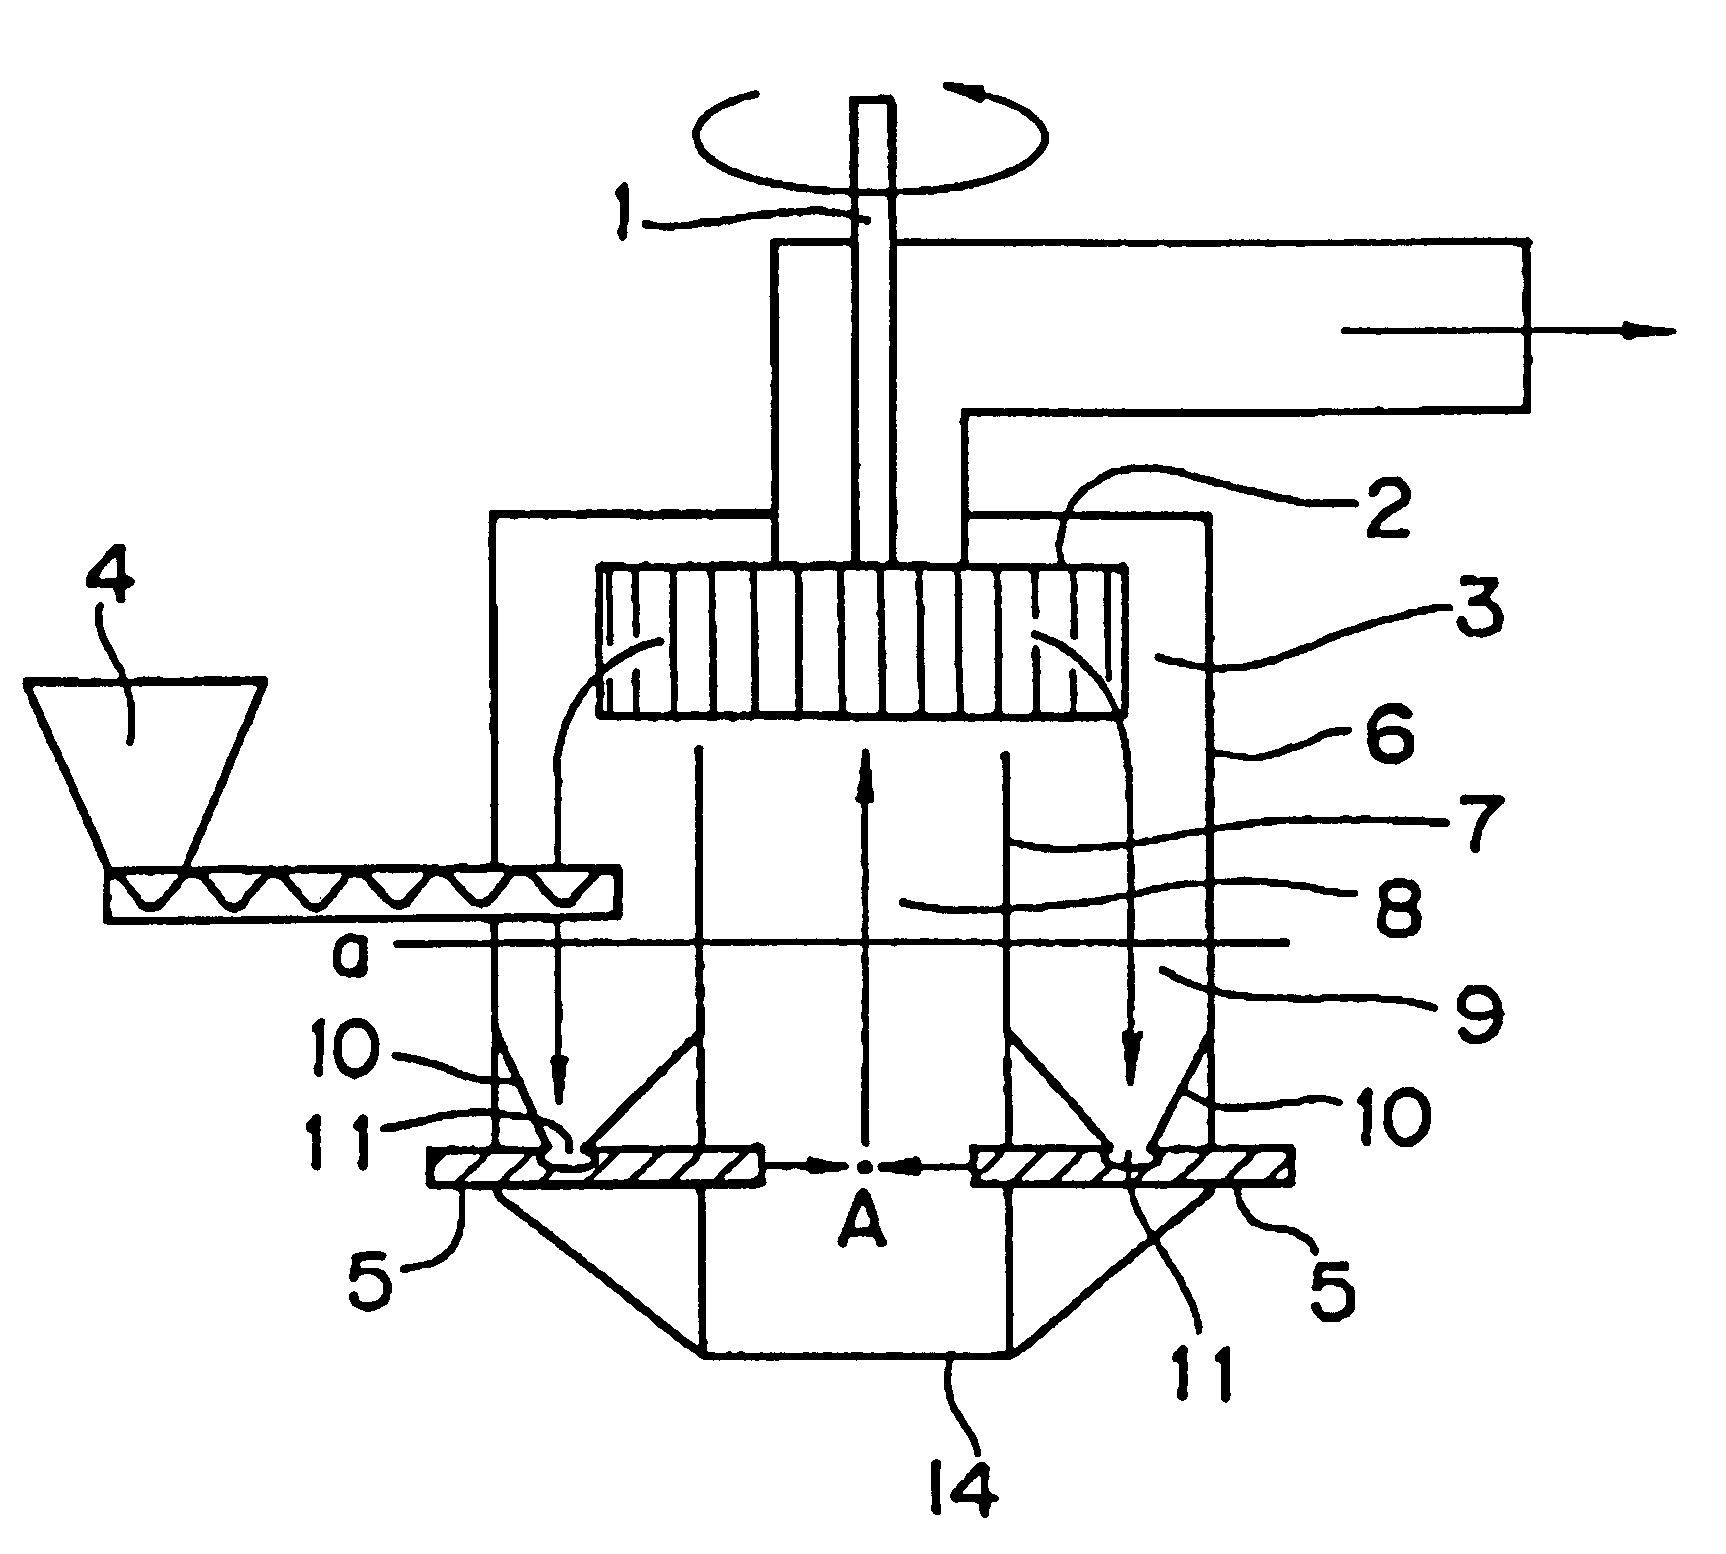 Mill provided with partition within milling chamber